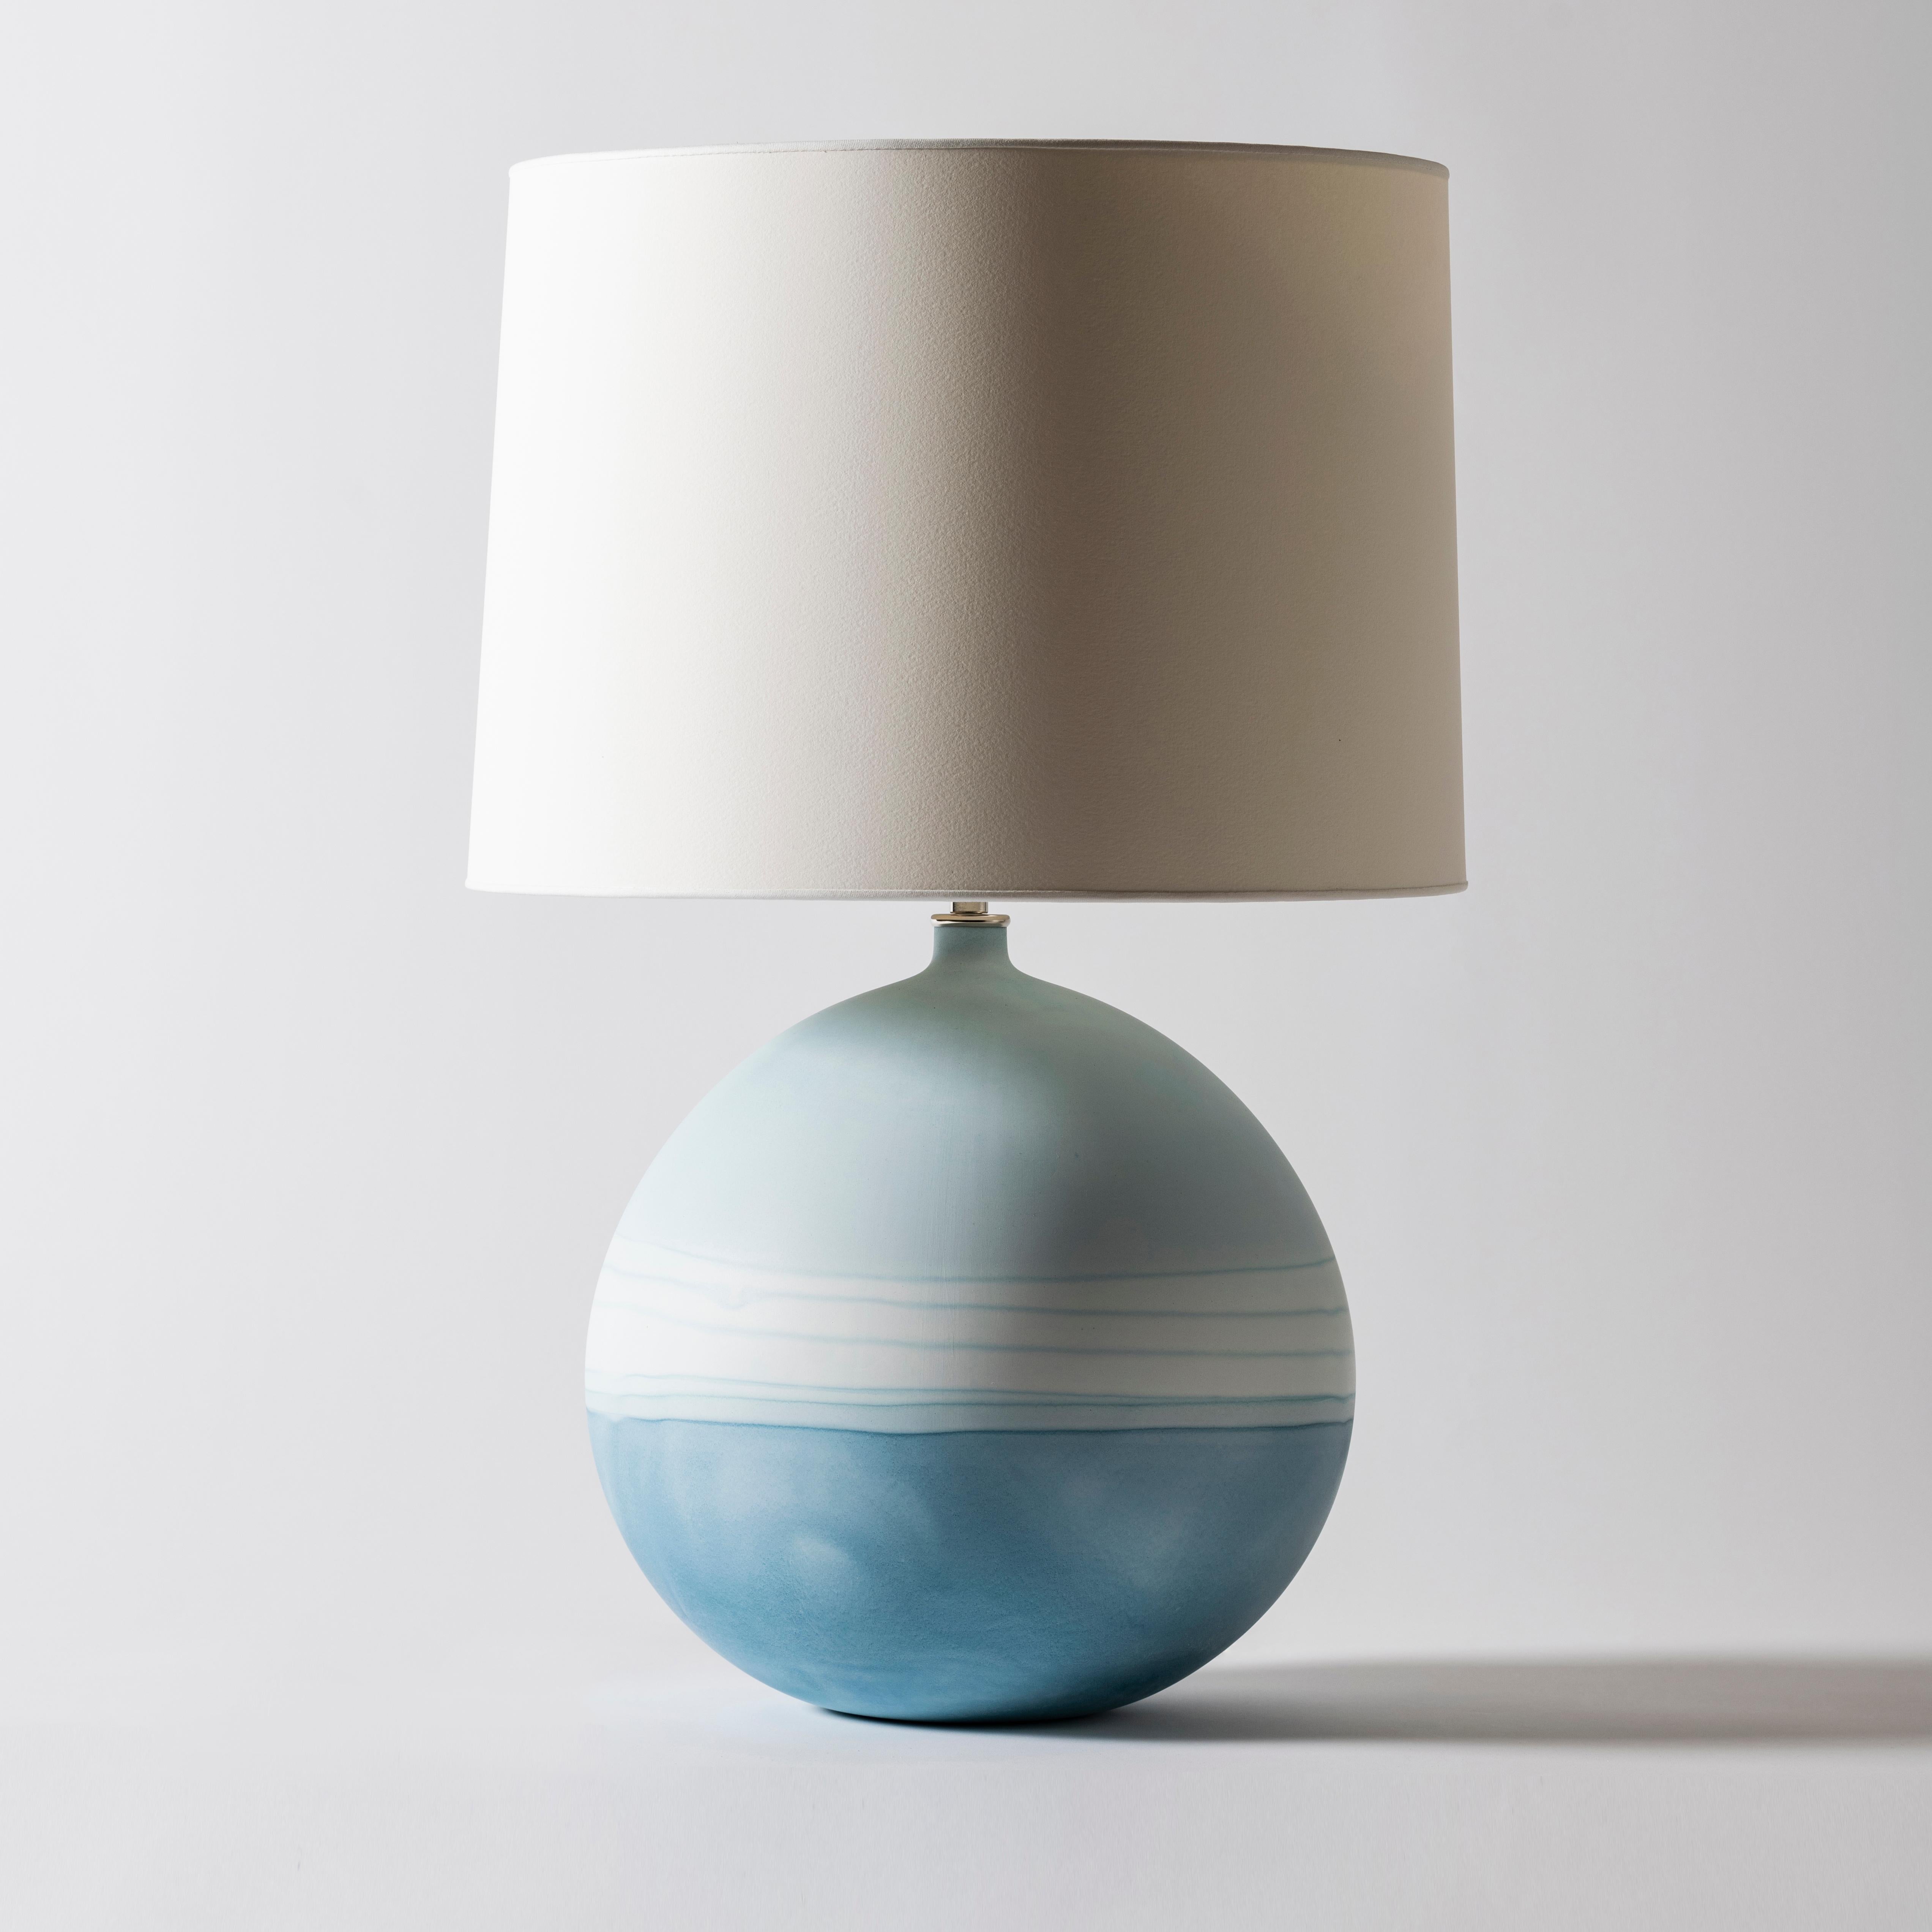 Jupiter lamp in blue Ombré by Elyse Graham
Dimensions: D38 x H61 cm
Materials: plaster, resin, cotton rag paper, brass, nickel. Hardware: polished nickel-plated brass uno threaded socket
withturn key switch, in-line dimmer.
Molded, dyed, and